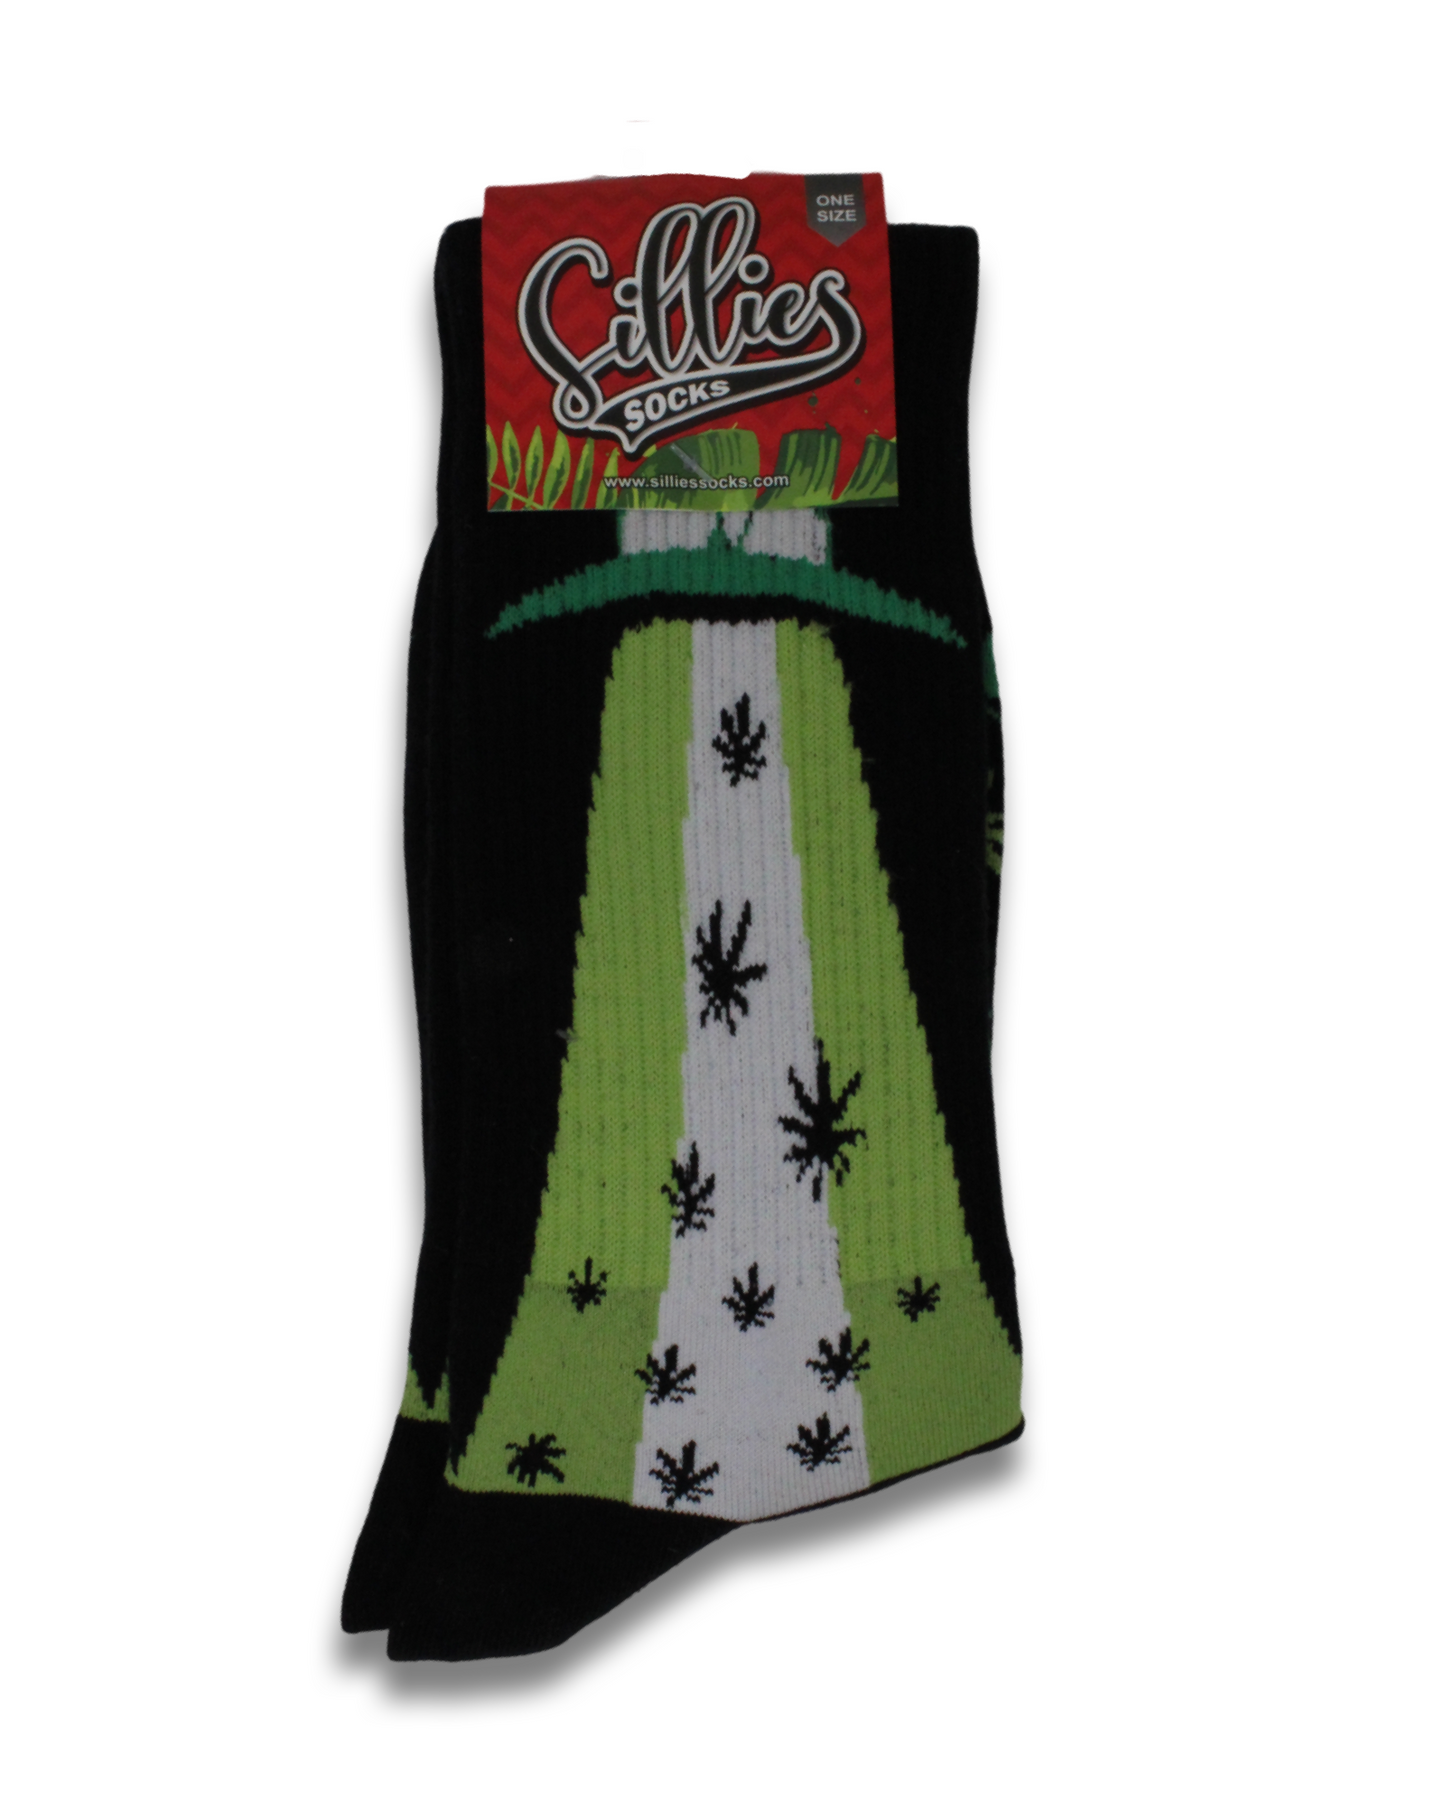 Sillies Socks One Size - Green and White Alien Ship with Hemp Leaves